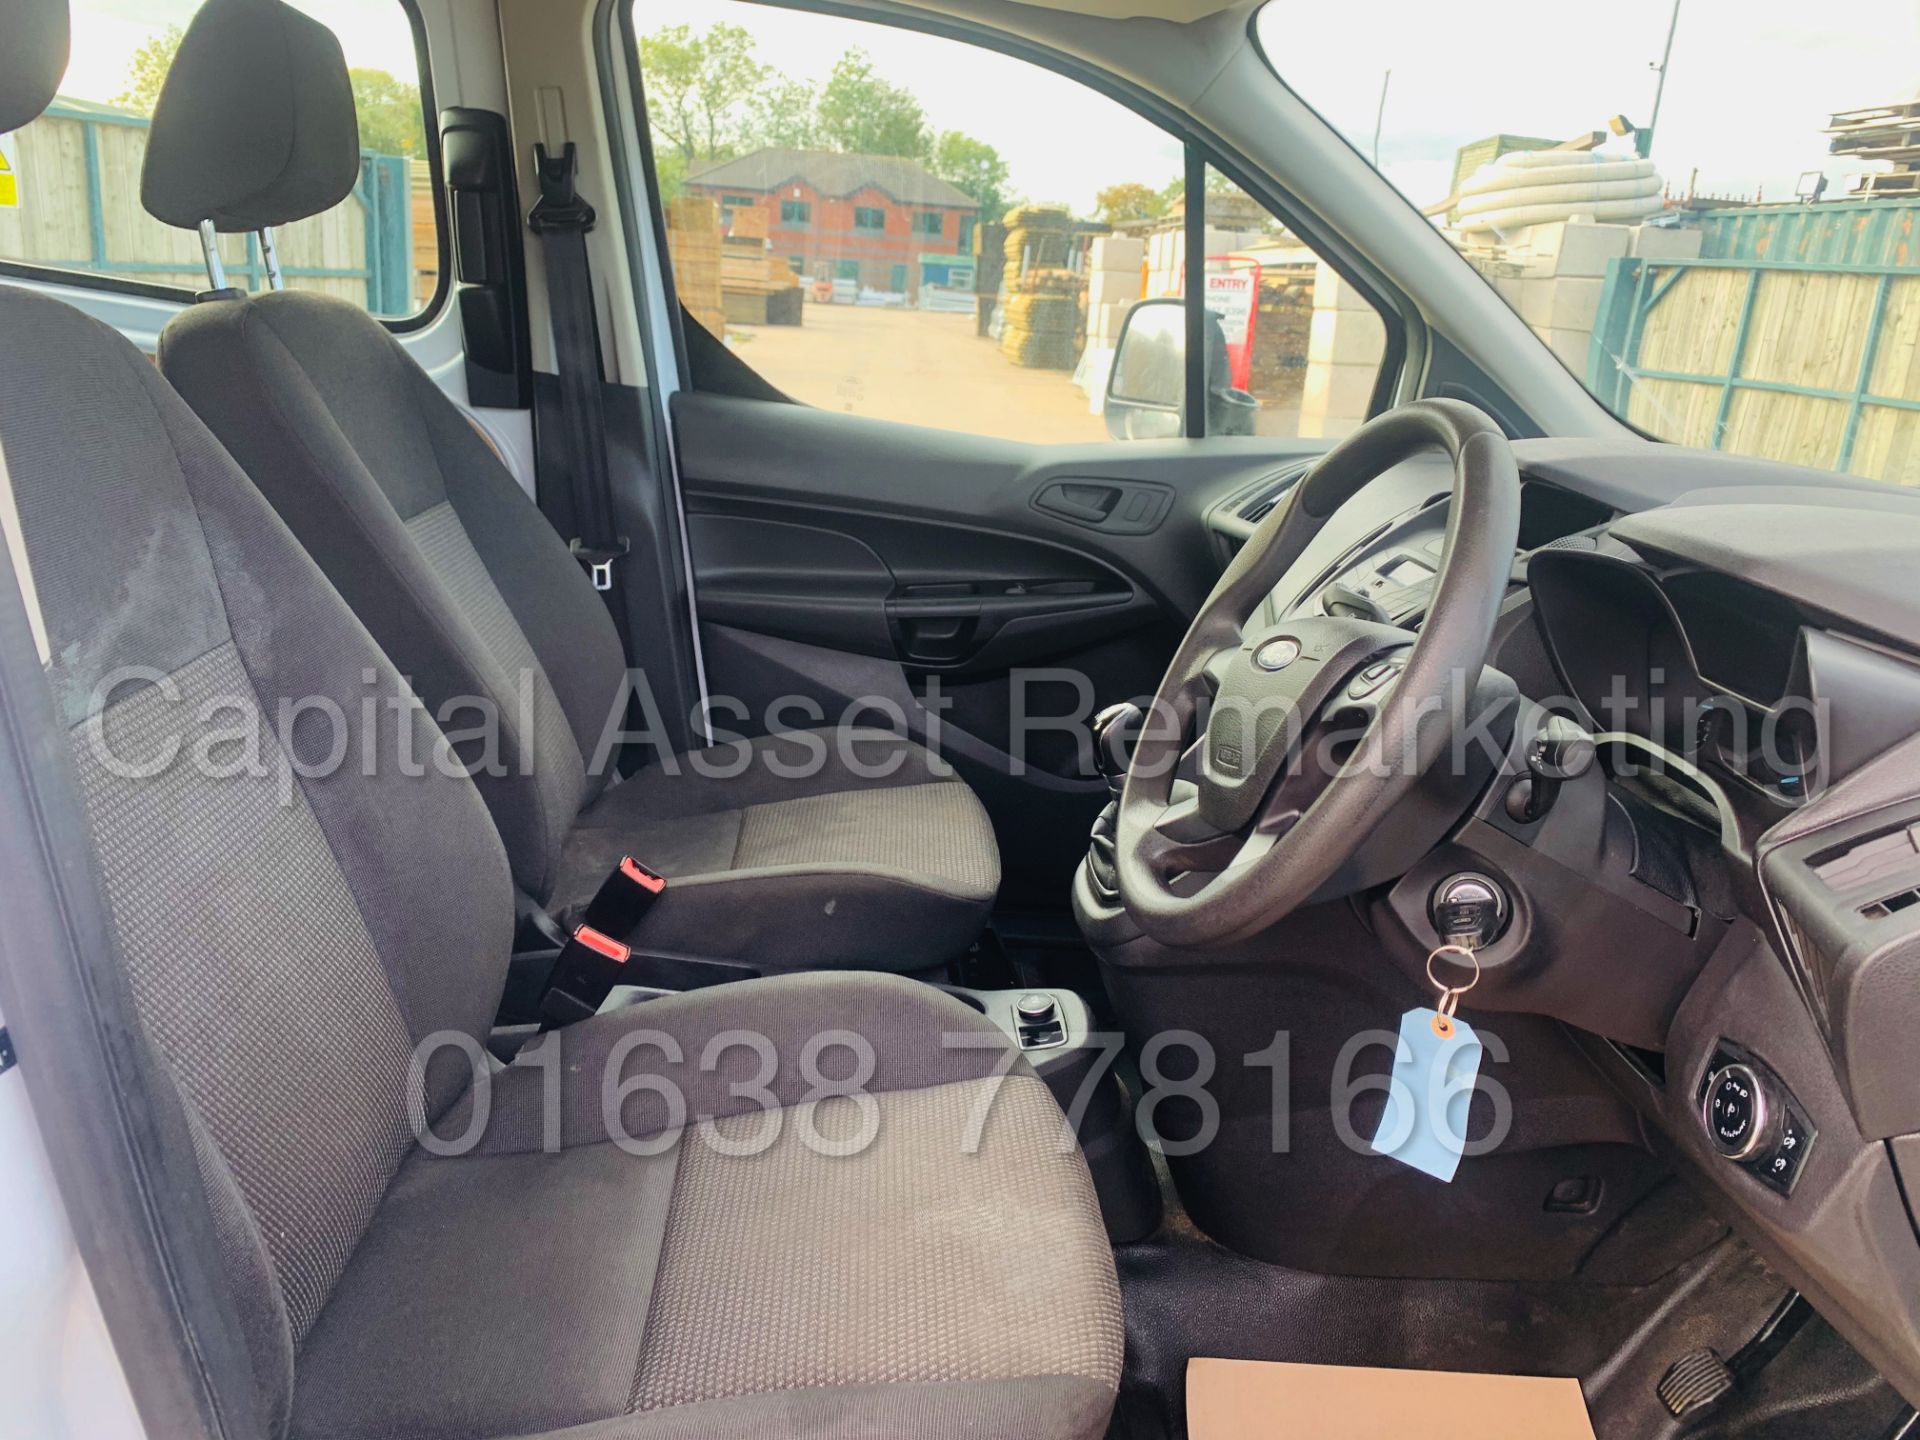 (On Sale) FORD TRANSIT CONNECT *LWB - 5 SEATER CREW VAN* (67 REG - EURO 6) 1.5 TDCI *A/C* (1 OWNER) - Image 29 of 40